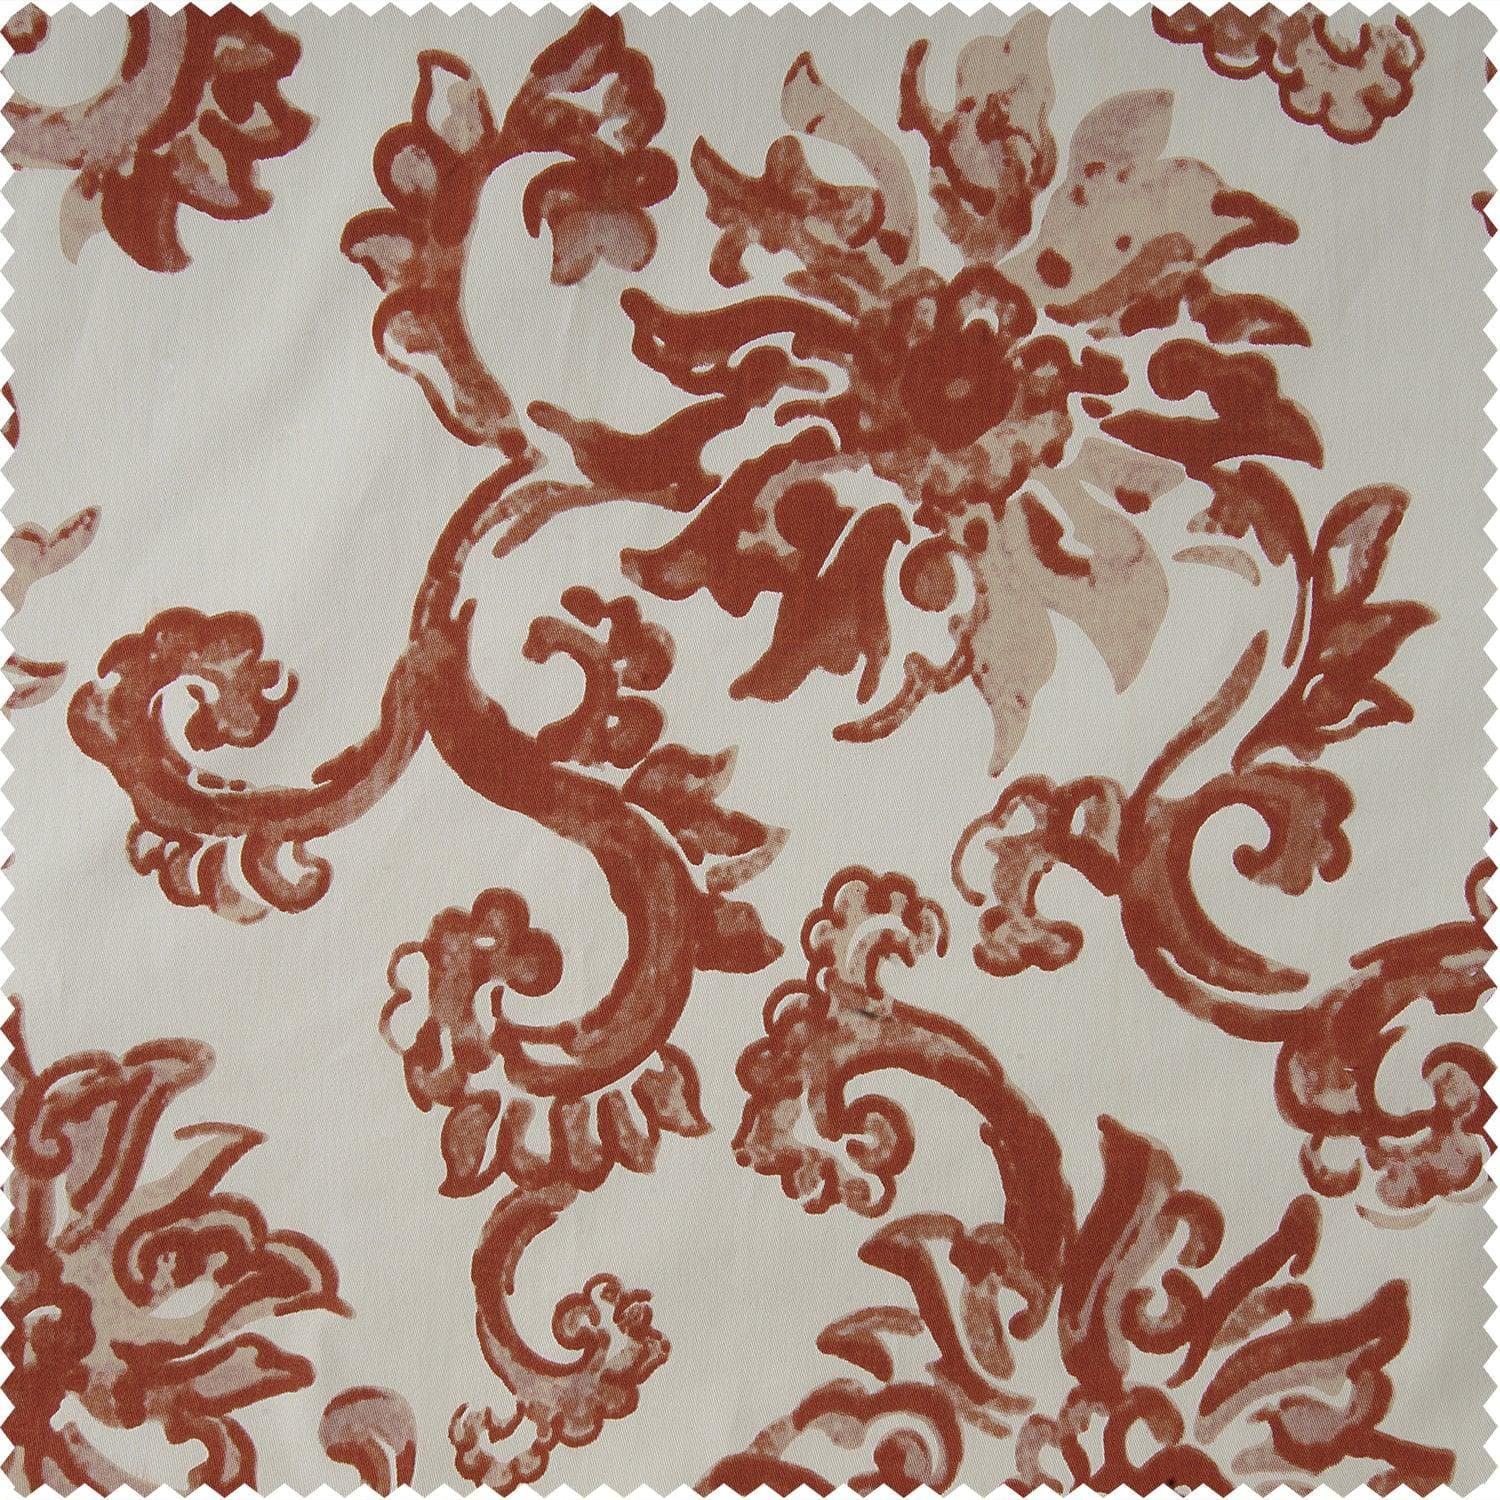 Indonesian Rust Printed Cotton Hotel Blackout Swatch